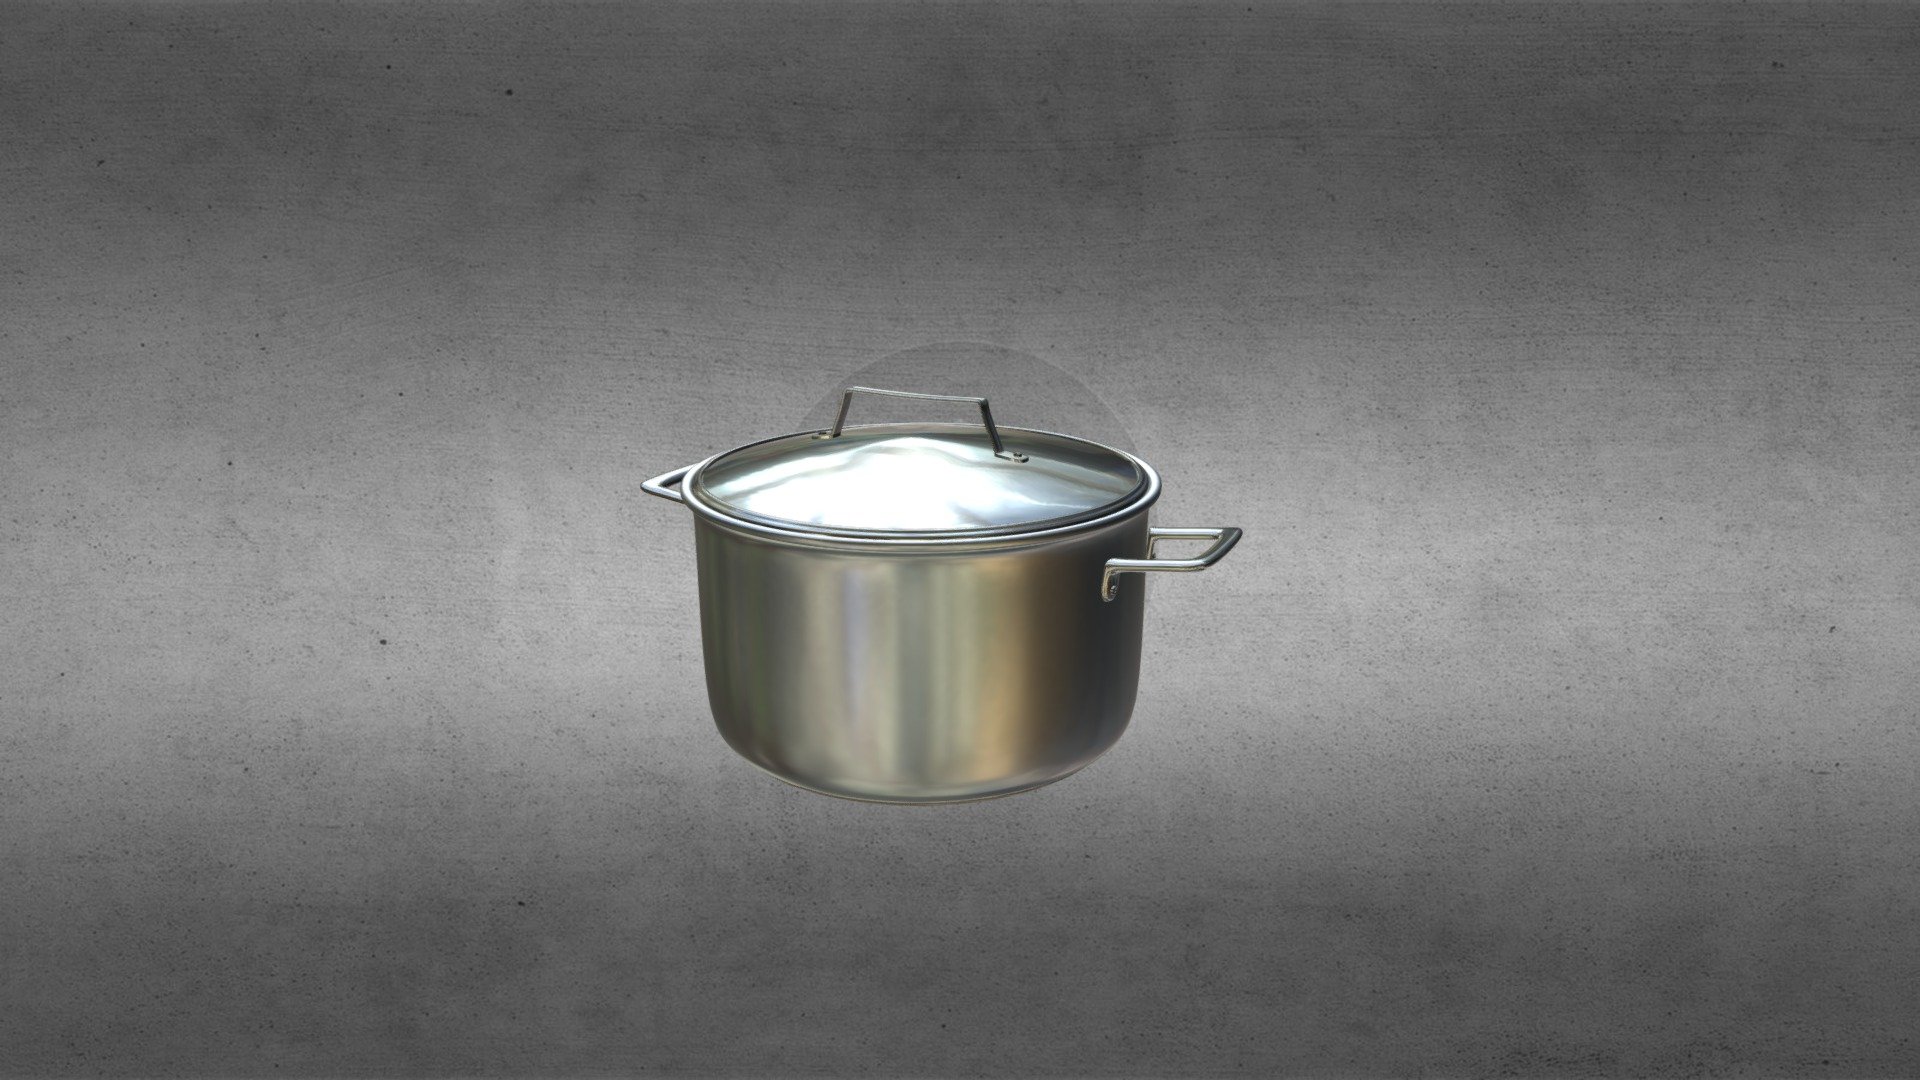 Stainless Steel Cooking Pot

A must for every kitchen classic stainless steel cooking pot. Removable pot lid.

Size
28.9 cm wide
15.8 cm high - Stainless Steel Cooking Pot - Download Free 3D model by rockefinger 3d model